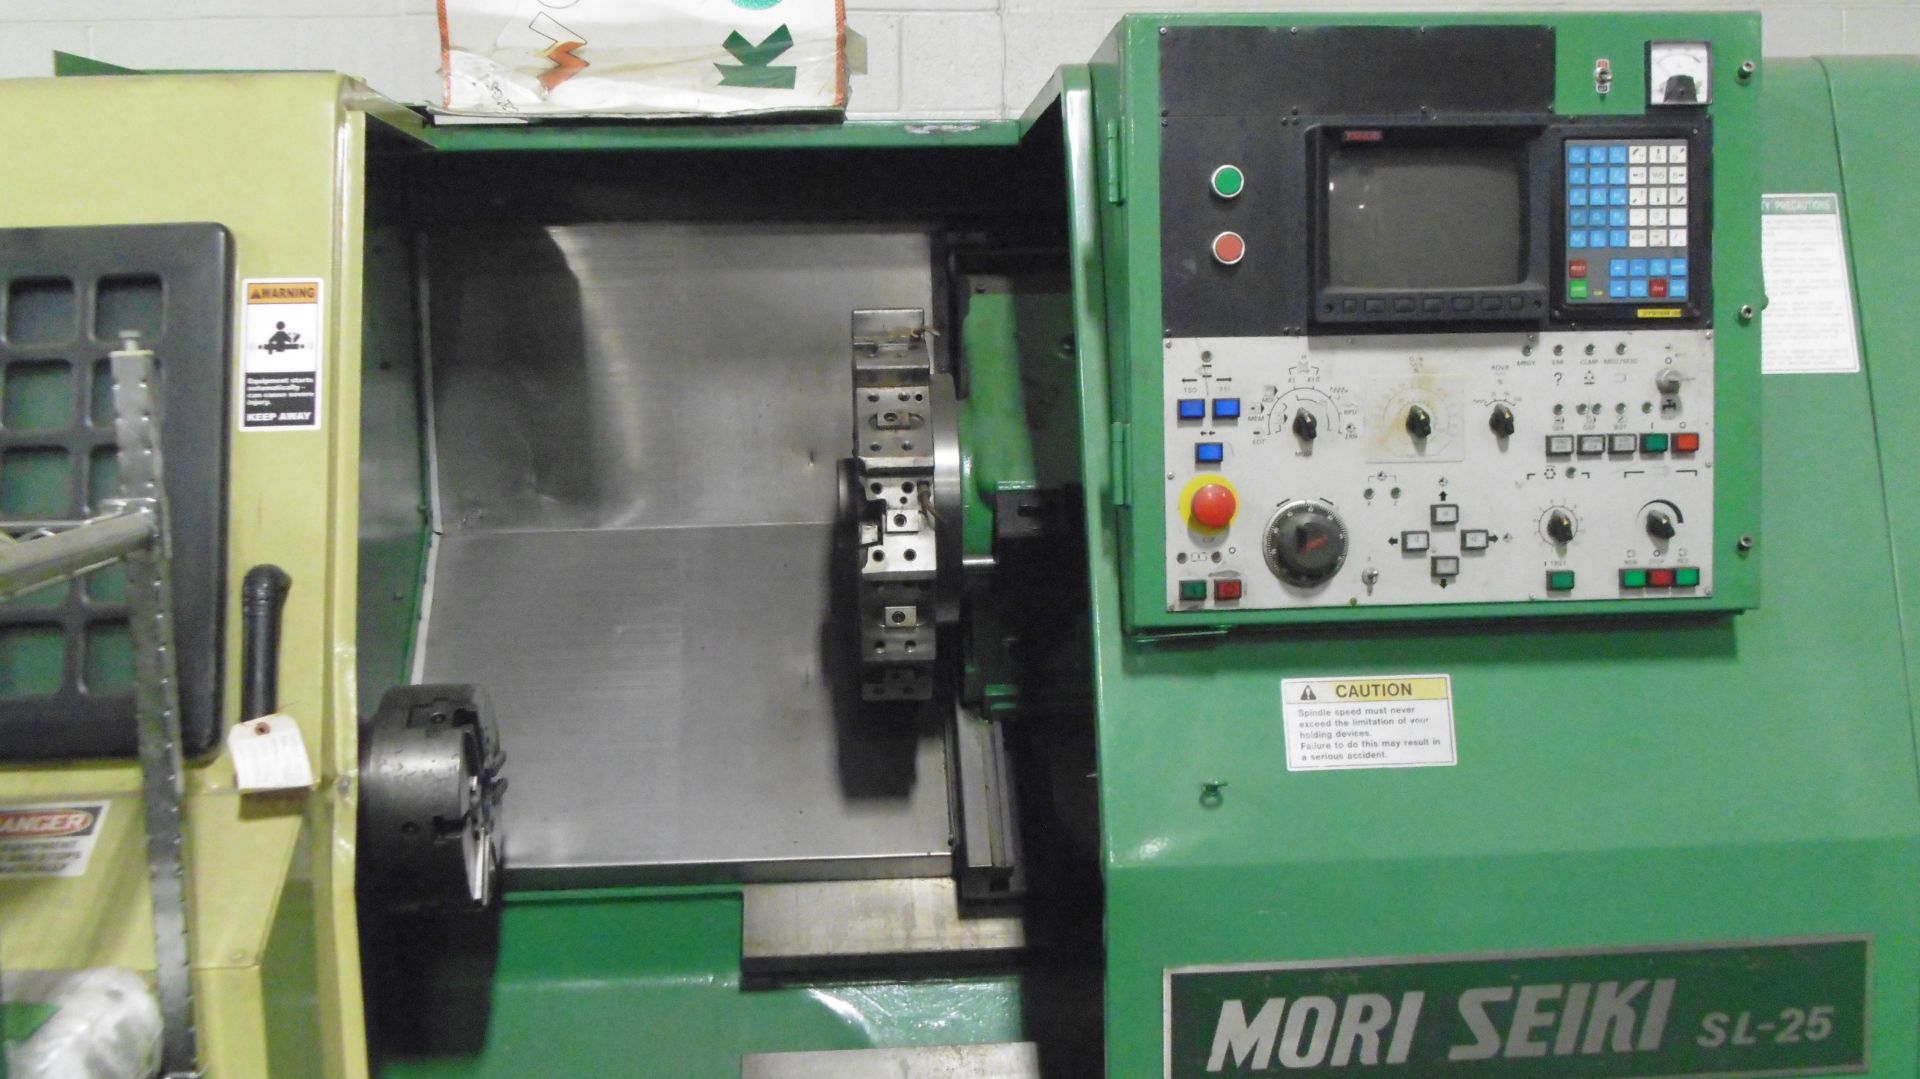 MORI-SEIKI SL-25 CNC TURNING CENTER WITH FANUC SYSTEM 10-T CNC CONTROL, TRAVELS X-6.29", Z-25.59", - Image 3 of 3